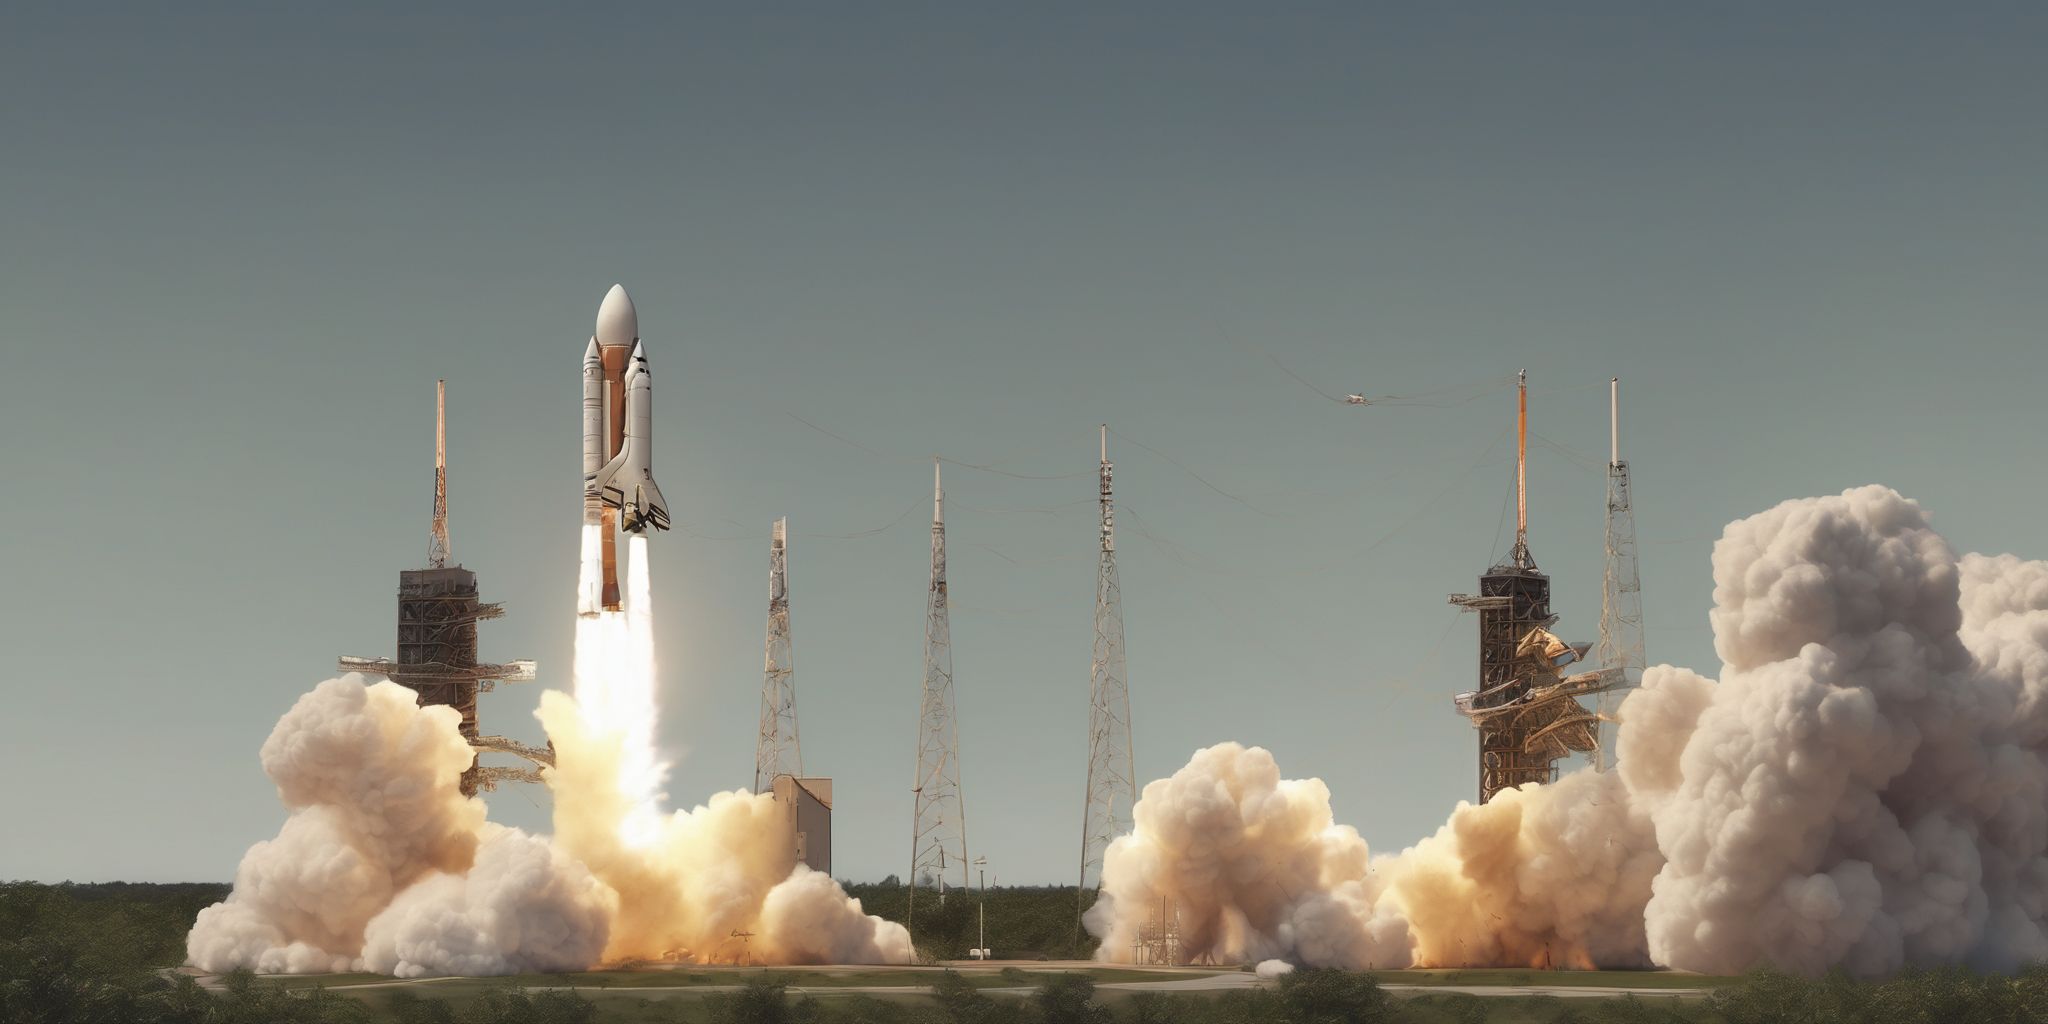 Liftoff  in realistic, photographic style